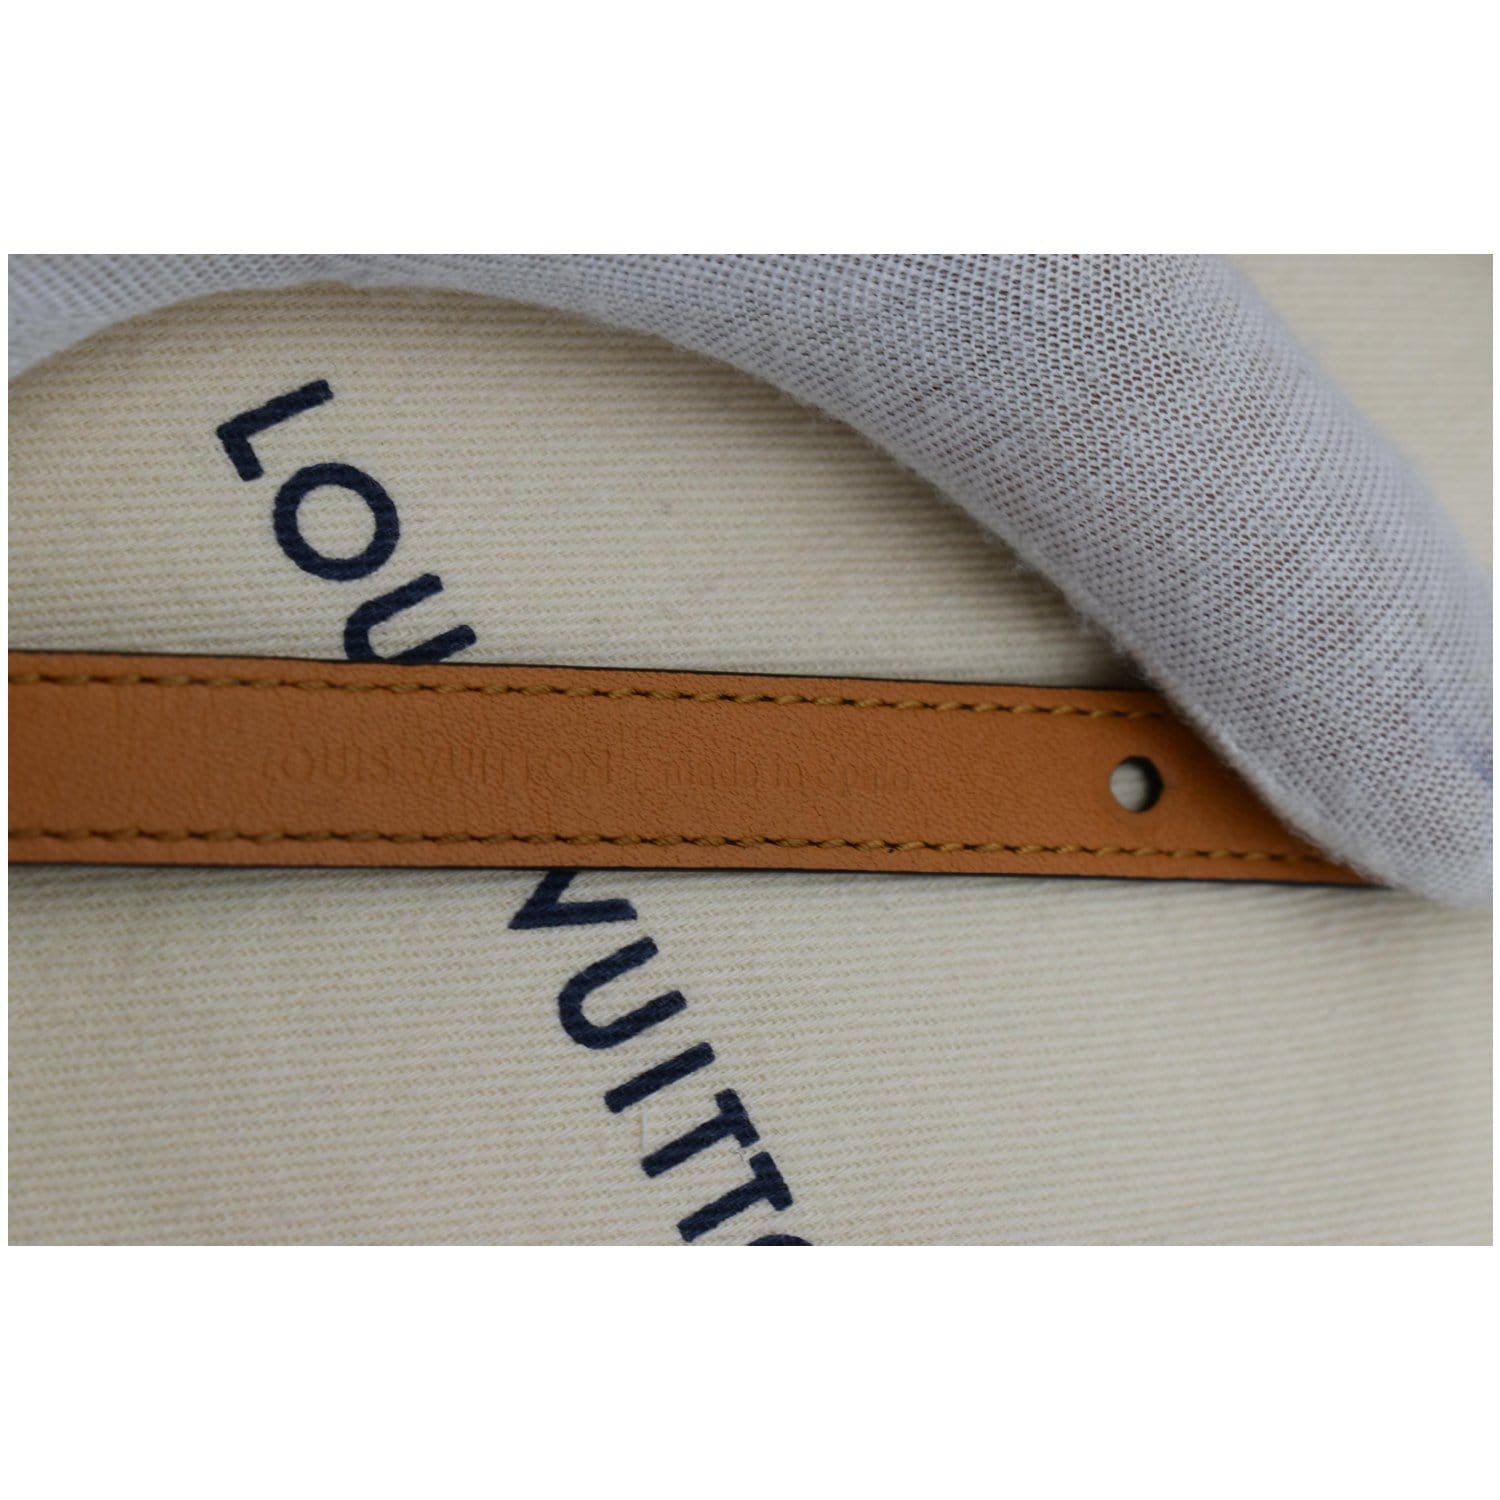 Essential v leather bracelet Louis Vuitton Brown in Leather - 28497701